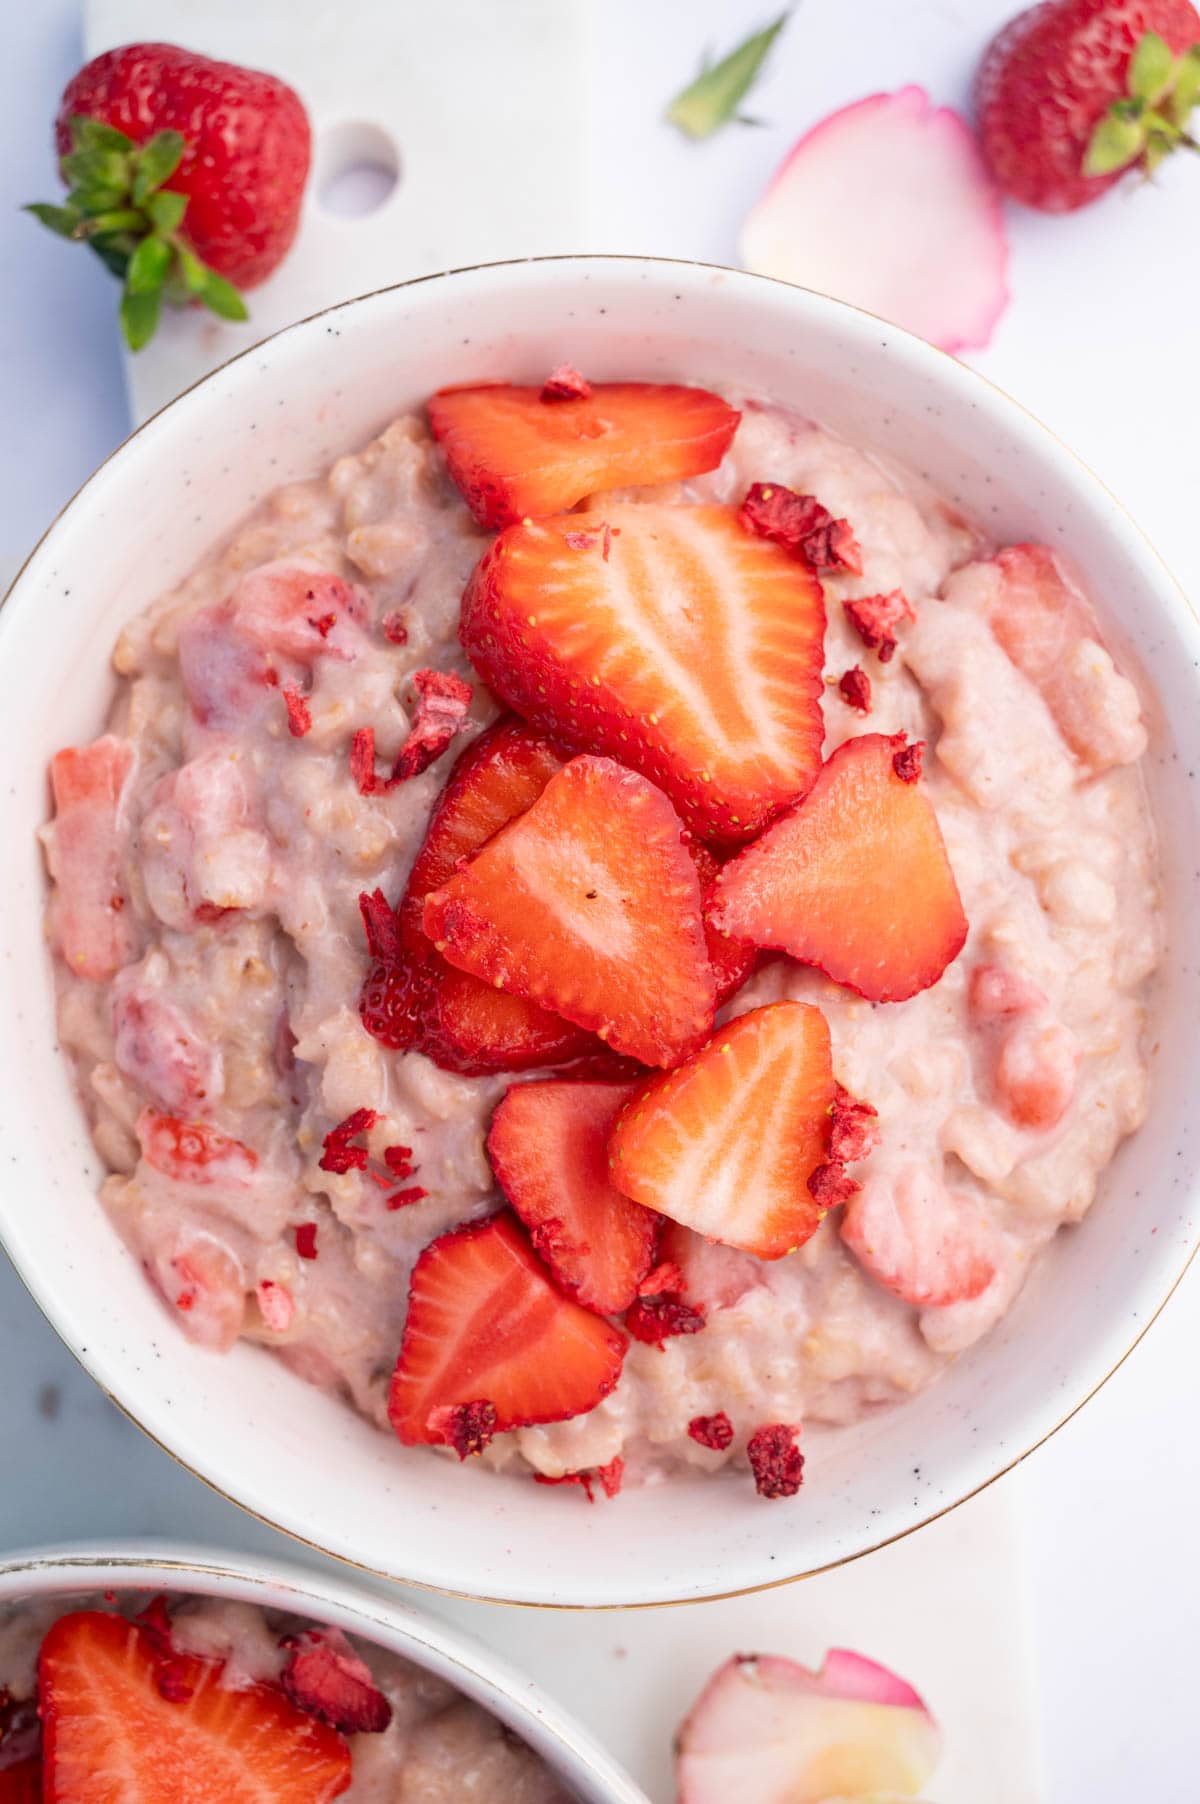 Strawberry oatmeal topped with strawberry slices and freeze-dried strawberries in a white bowl.